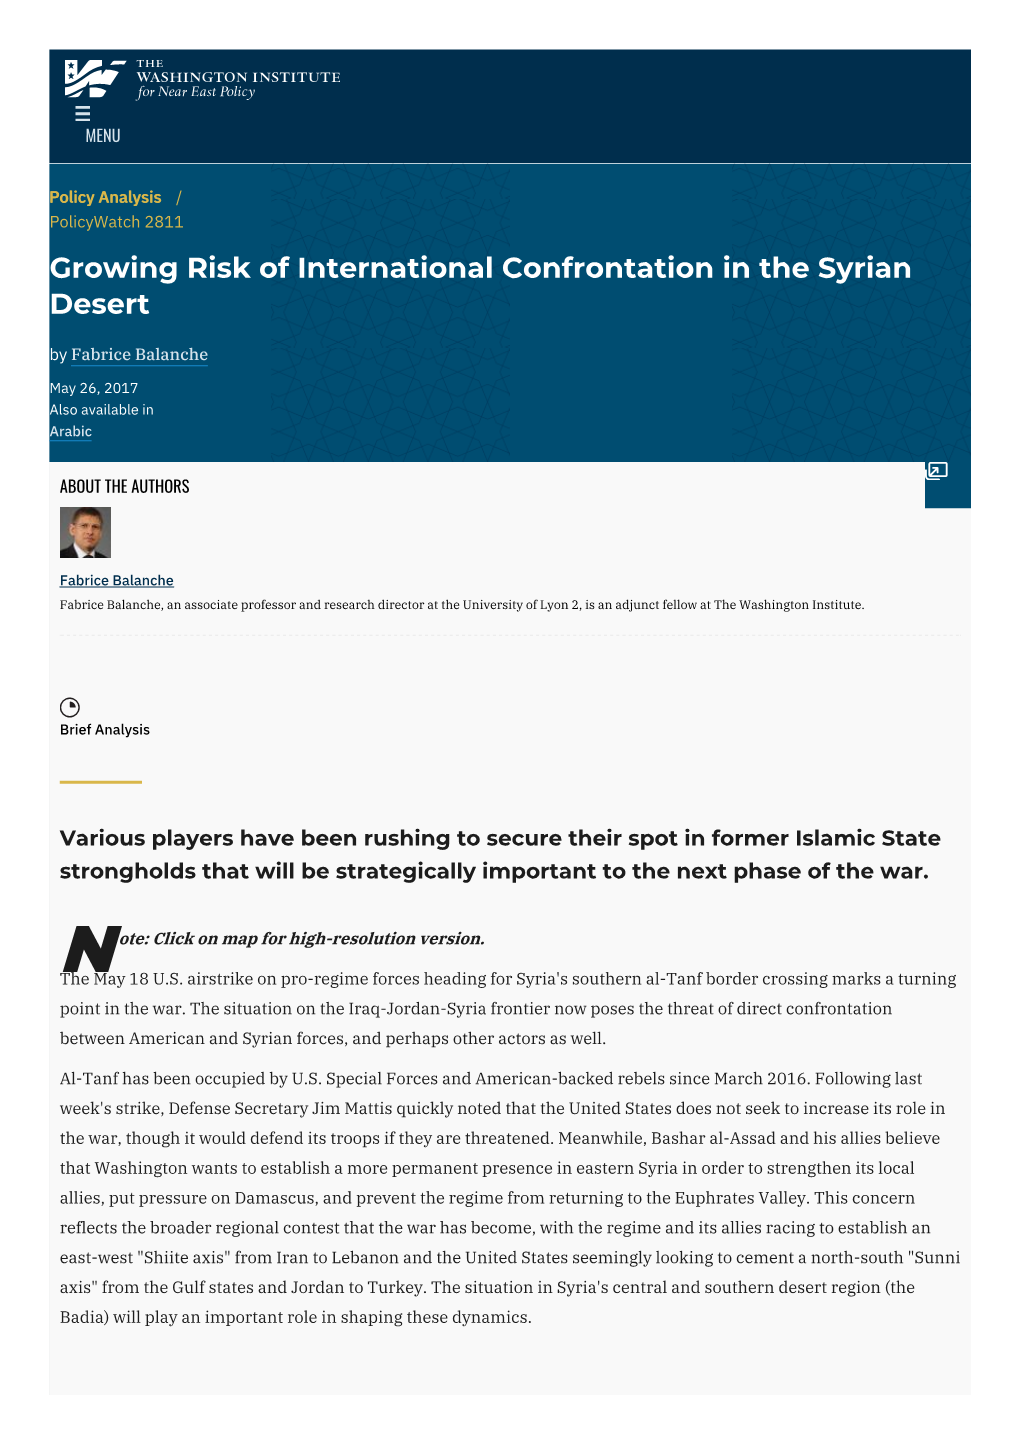 Growing Risk of International Confrontation in the Syrian Desert by Fabrice Balanche